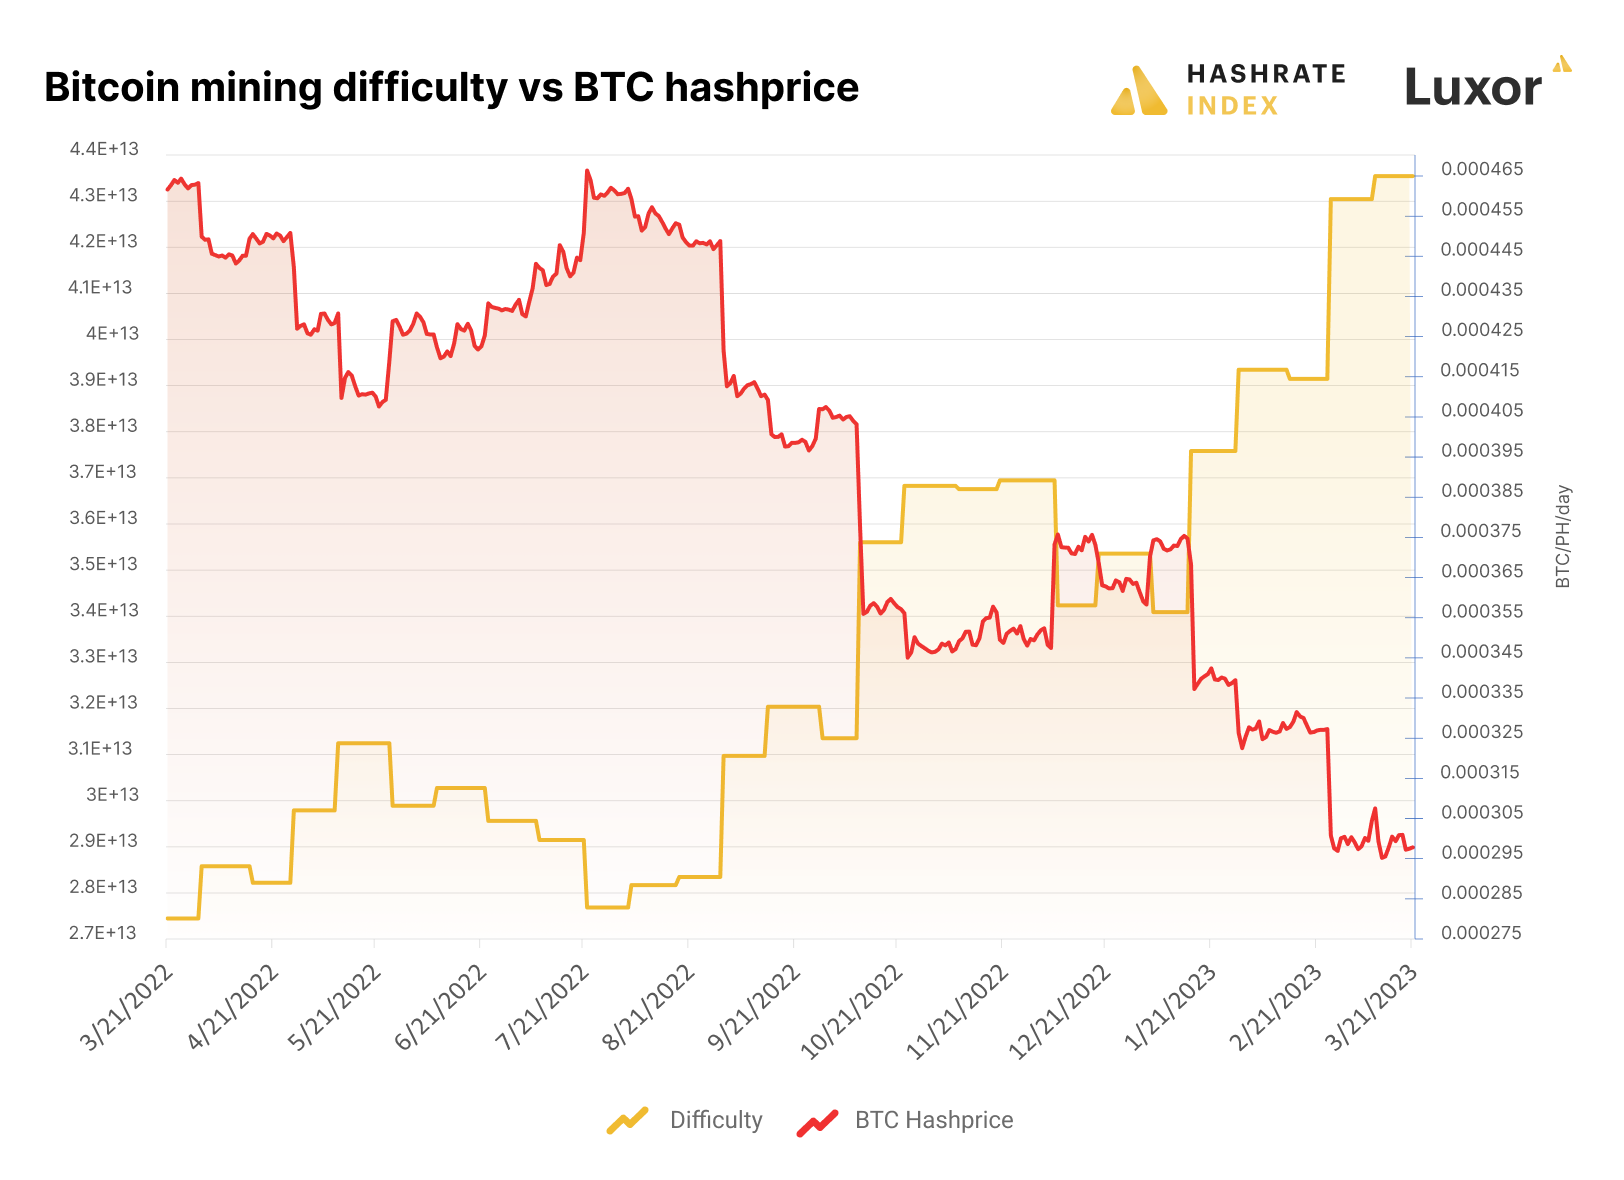 BTC hashprice and Bitcoin difficulty year-over-year (March 21, 2022 - March 21, 2023) | Source: Hashrate Index